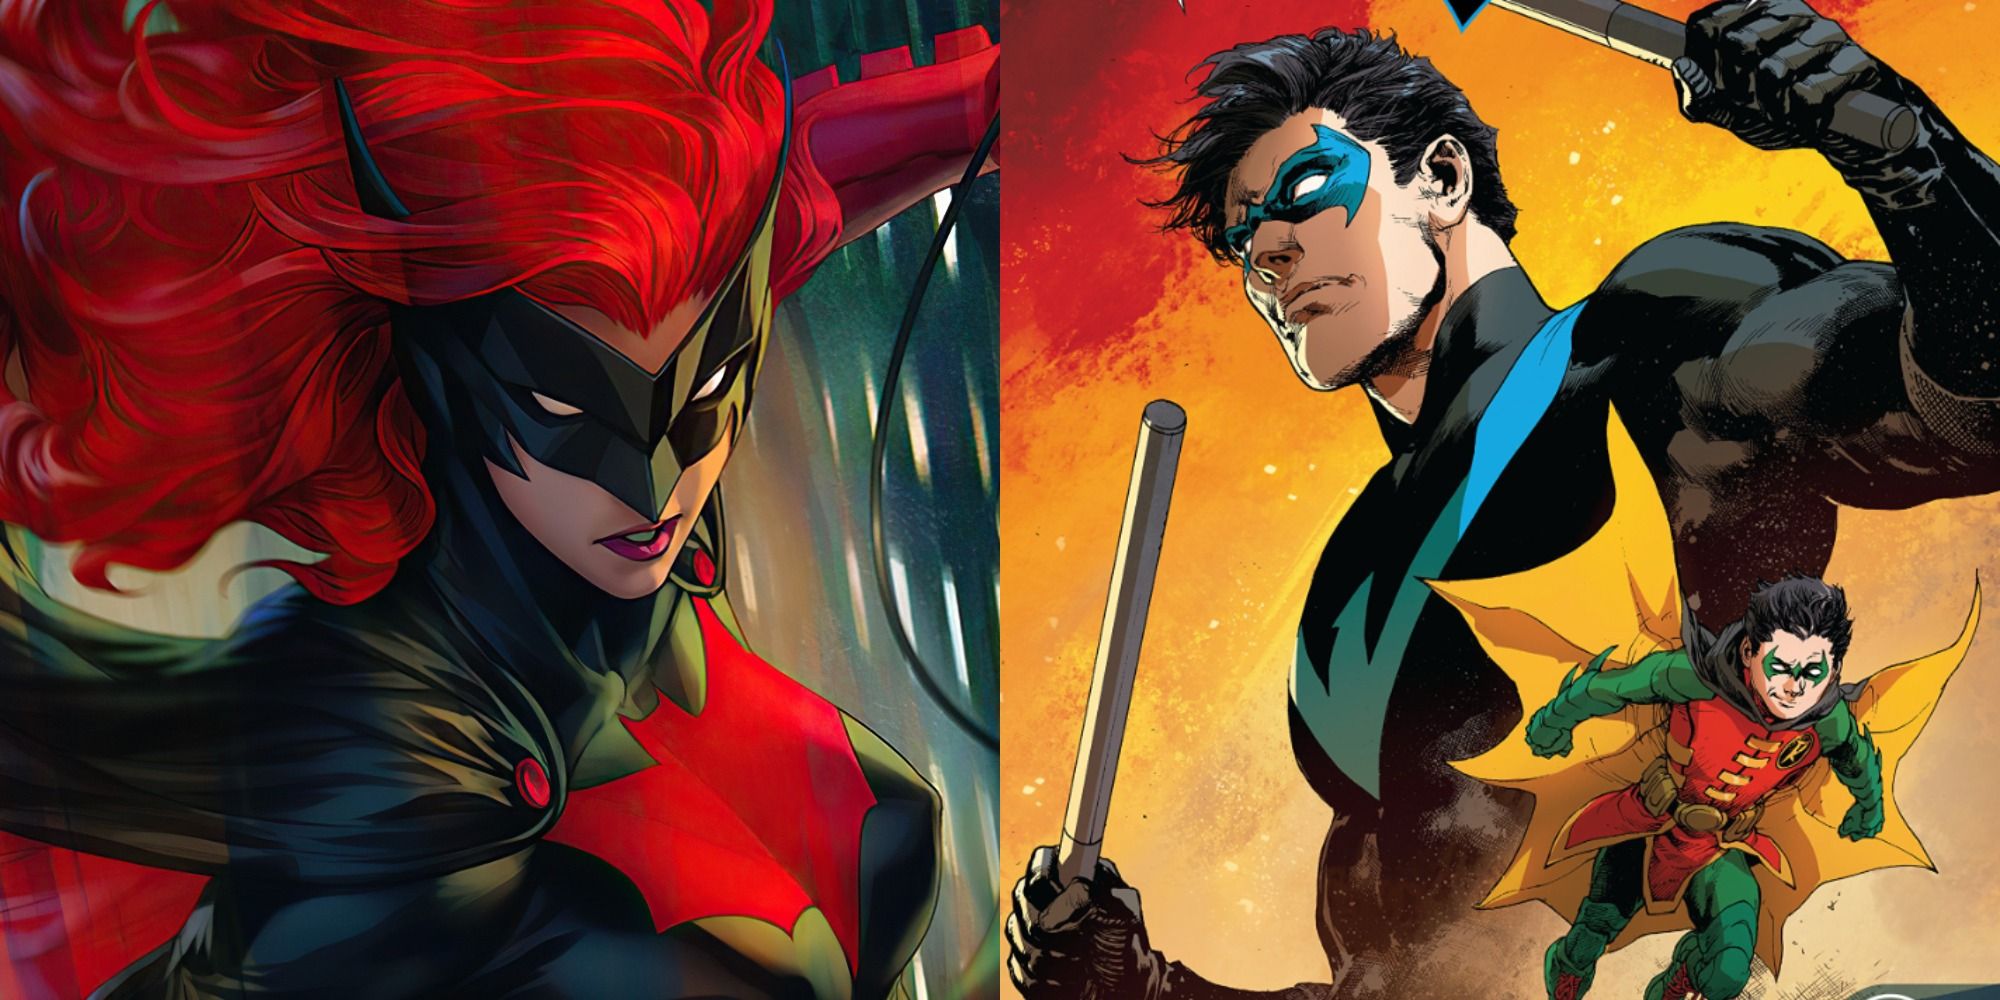 Split image of Batwoman posing & Nightwing and Robin leaping into battle in DC Comics.